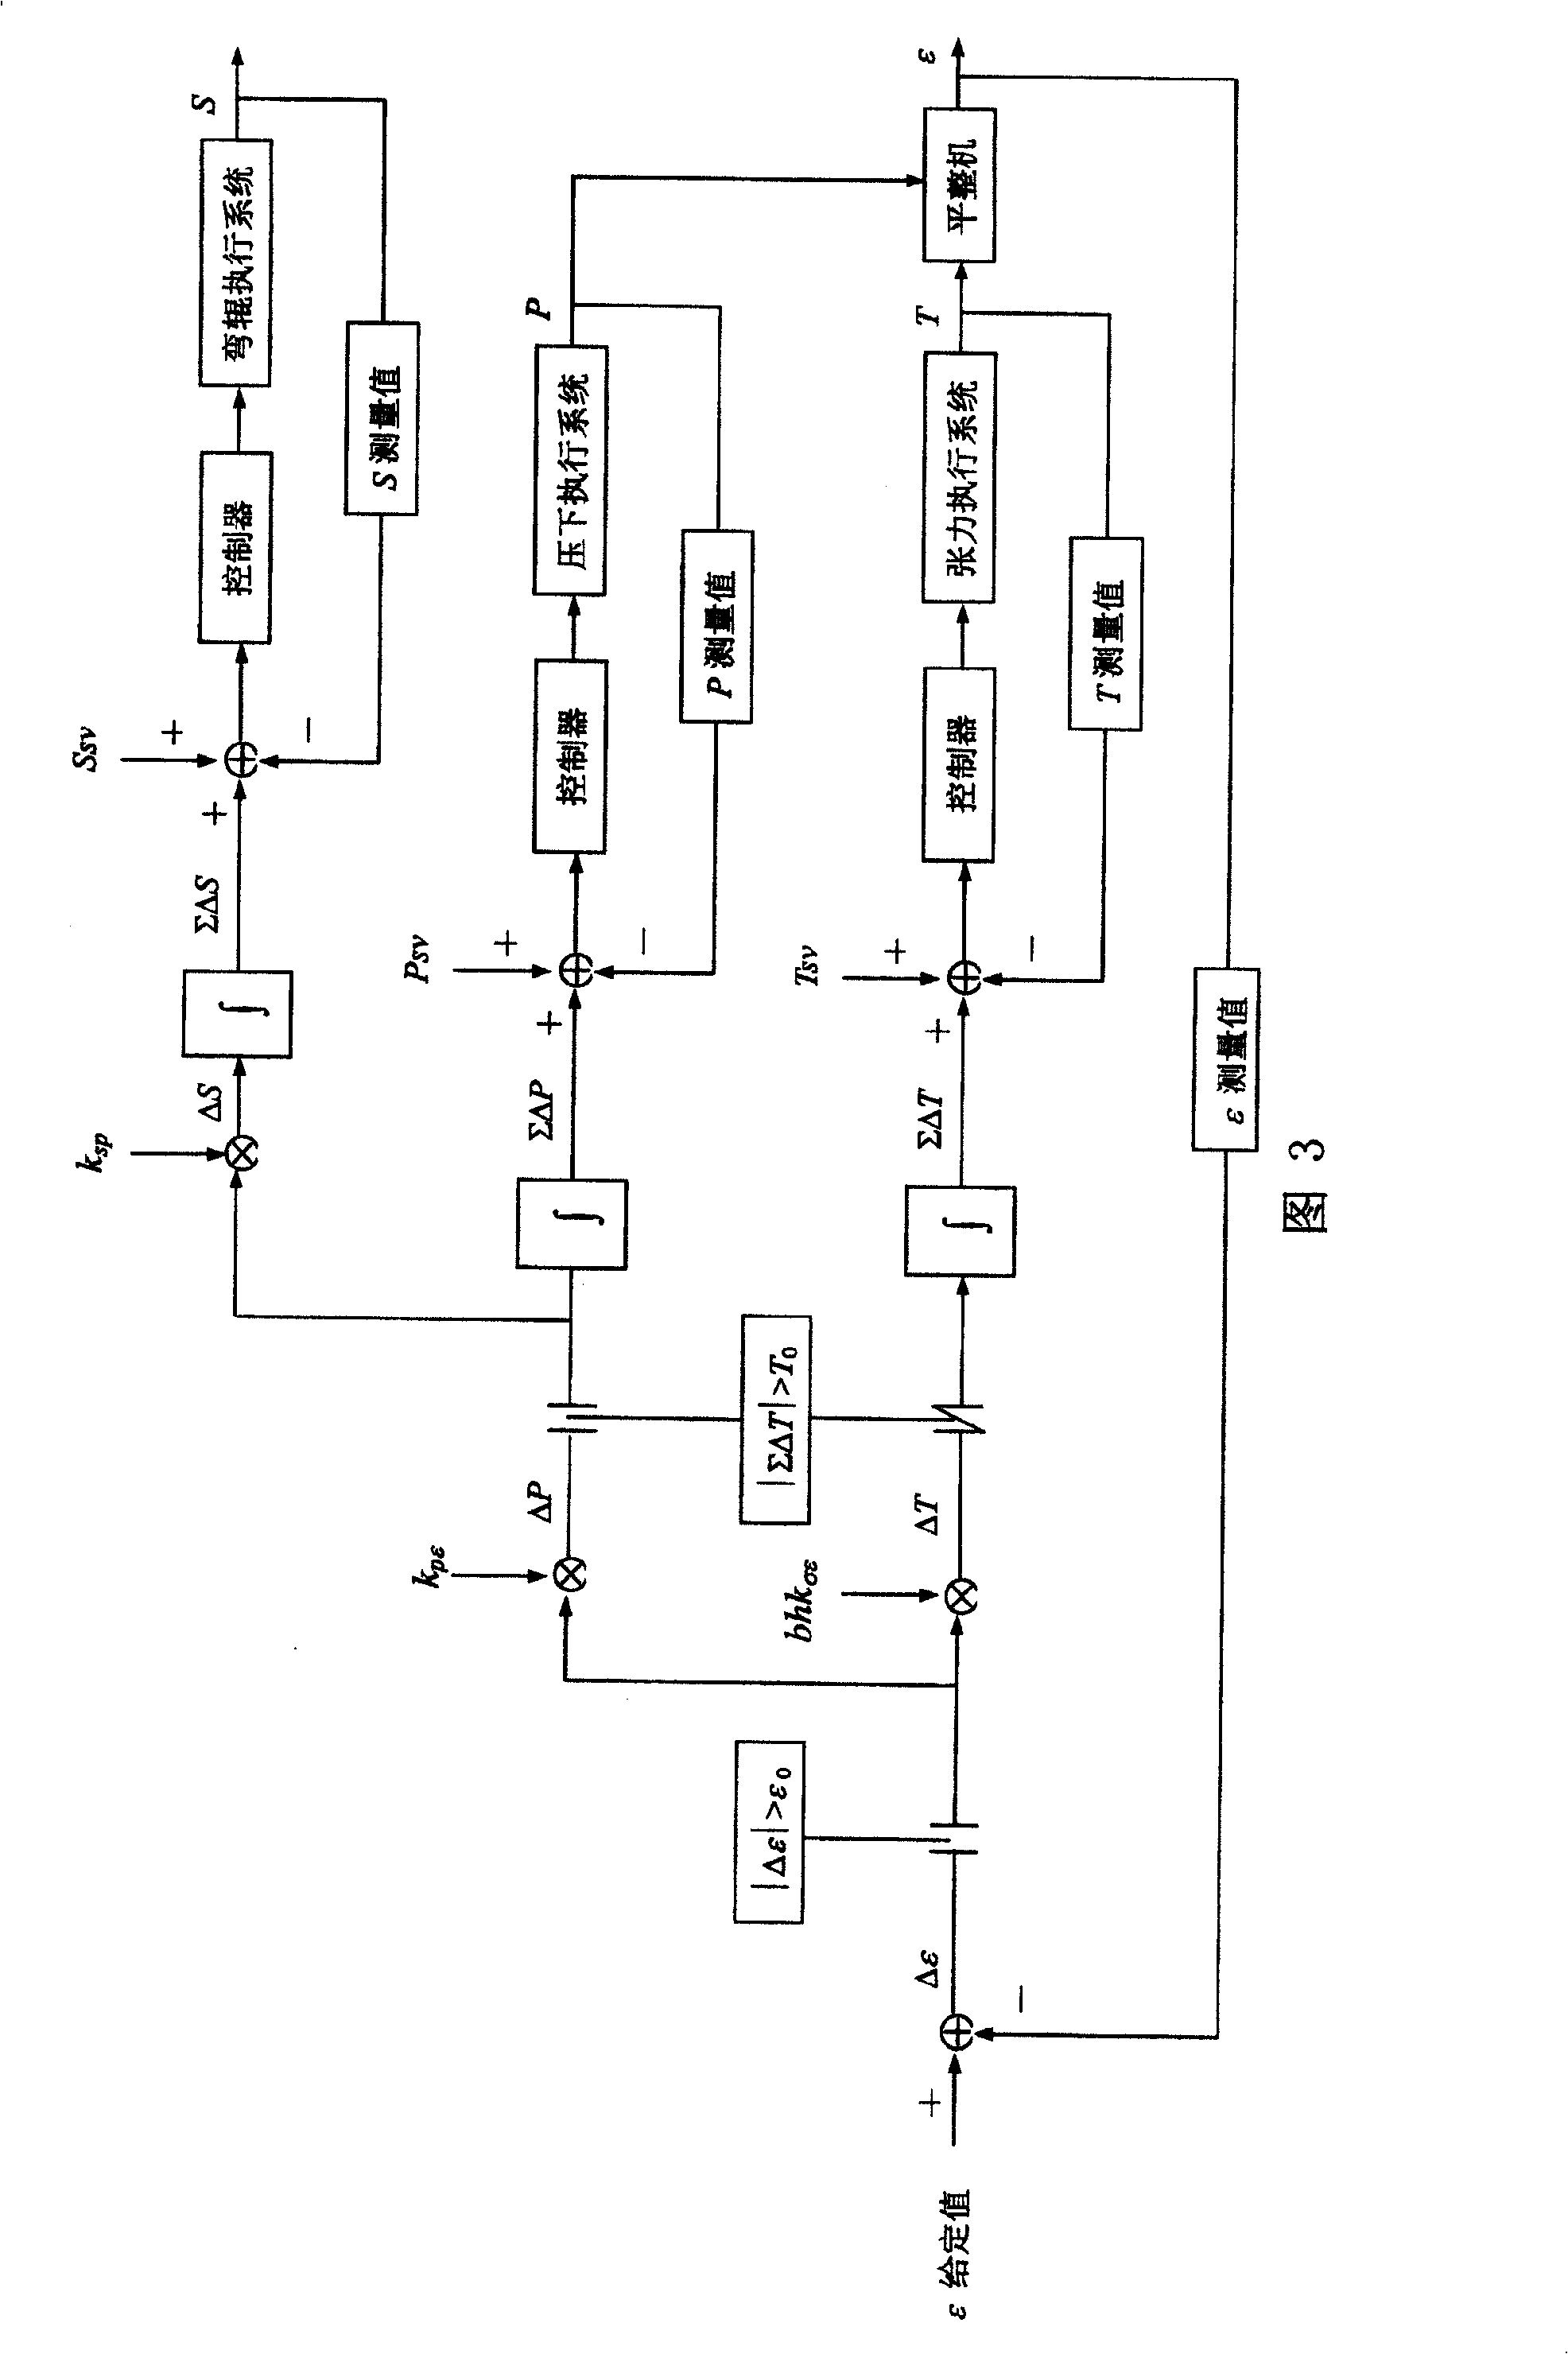 Extension coefficient and plate shape integrated control method in steel strip flattening process